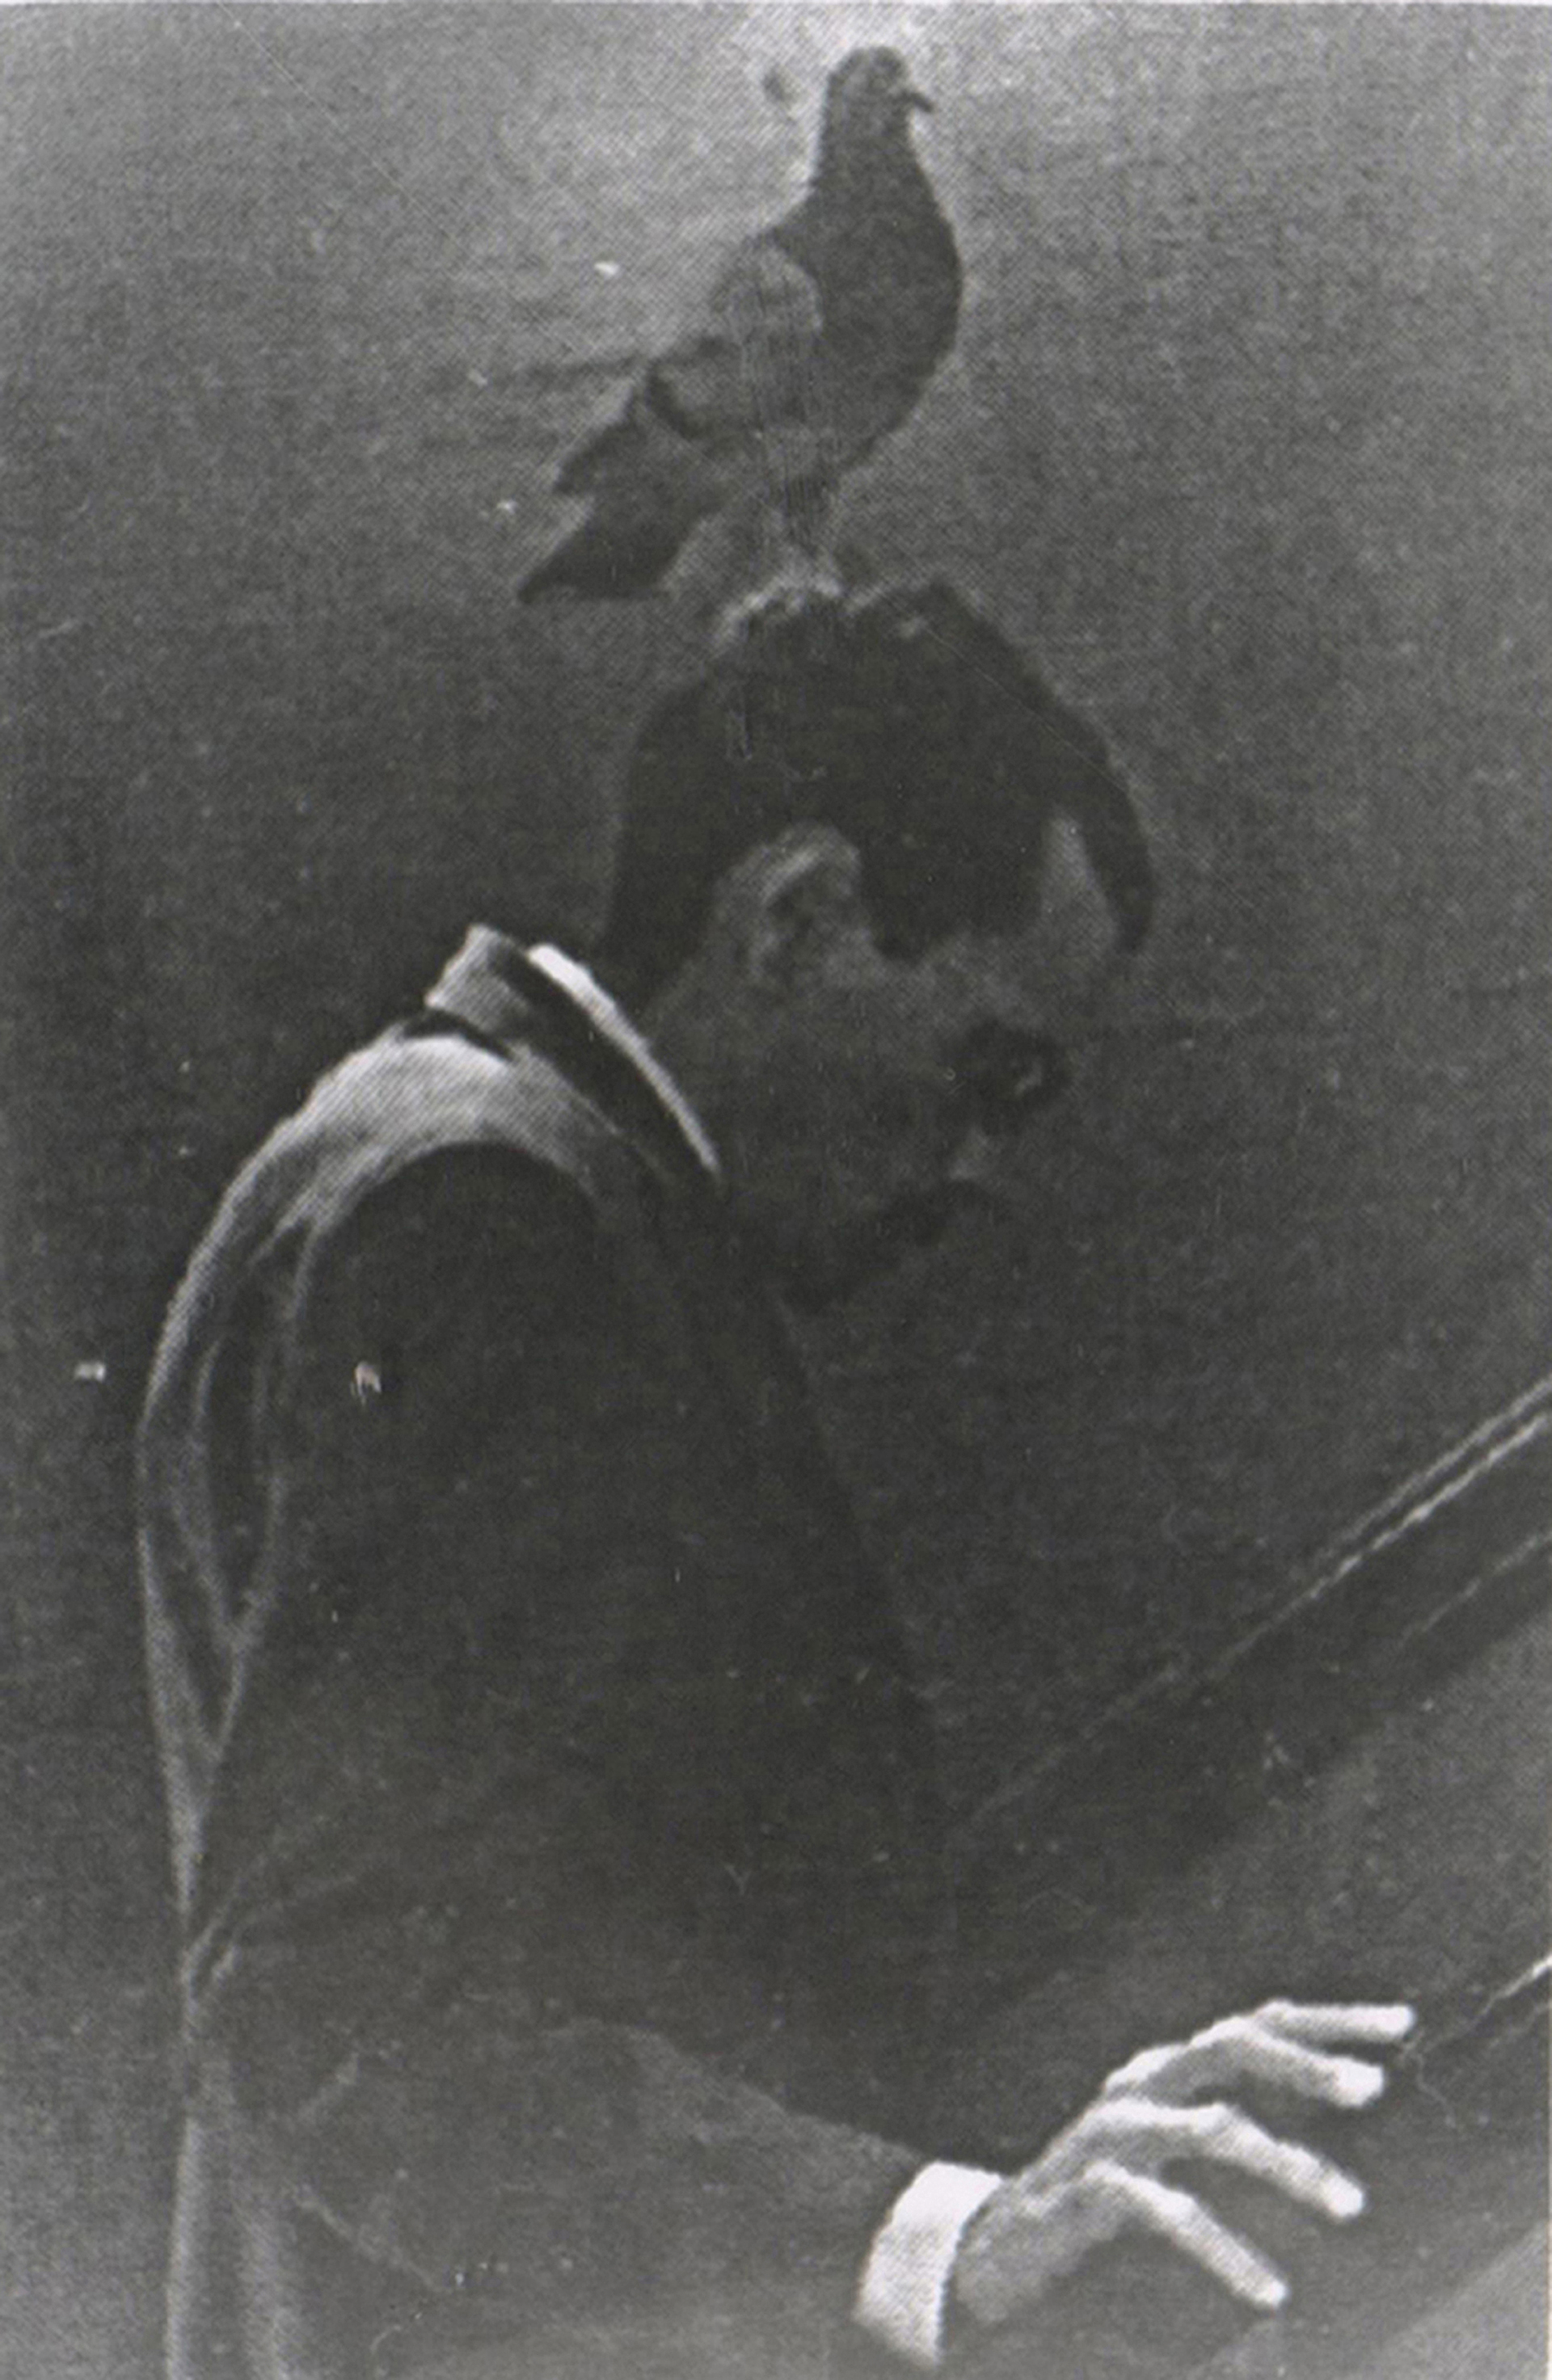 Spy with his spy-pigeon on a mission, 1949. The memoirs of Yan Khtovich, 2015-2017. Taking the form of a personal diary and memoir, the book included images, documents, collages, and contemporary photographs printed with vintage printing techniques